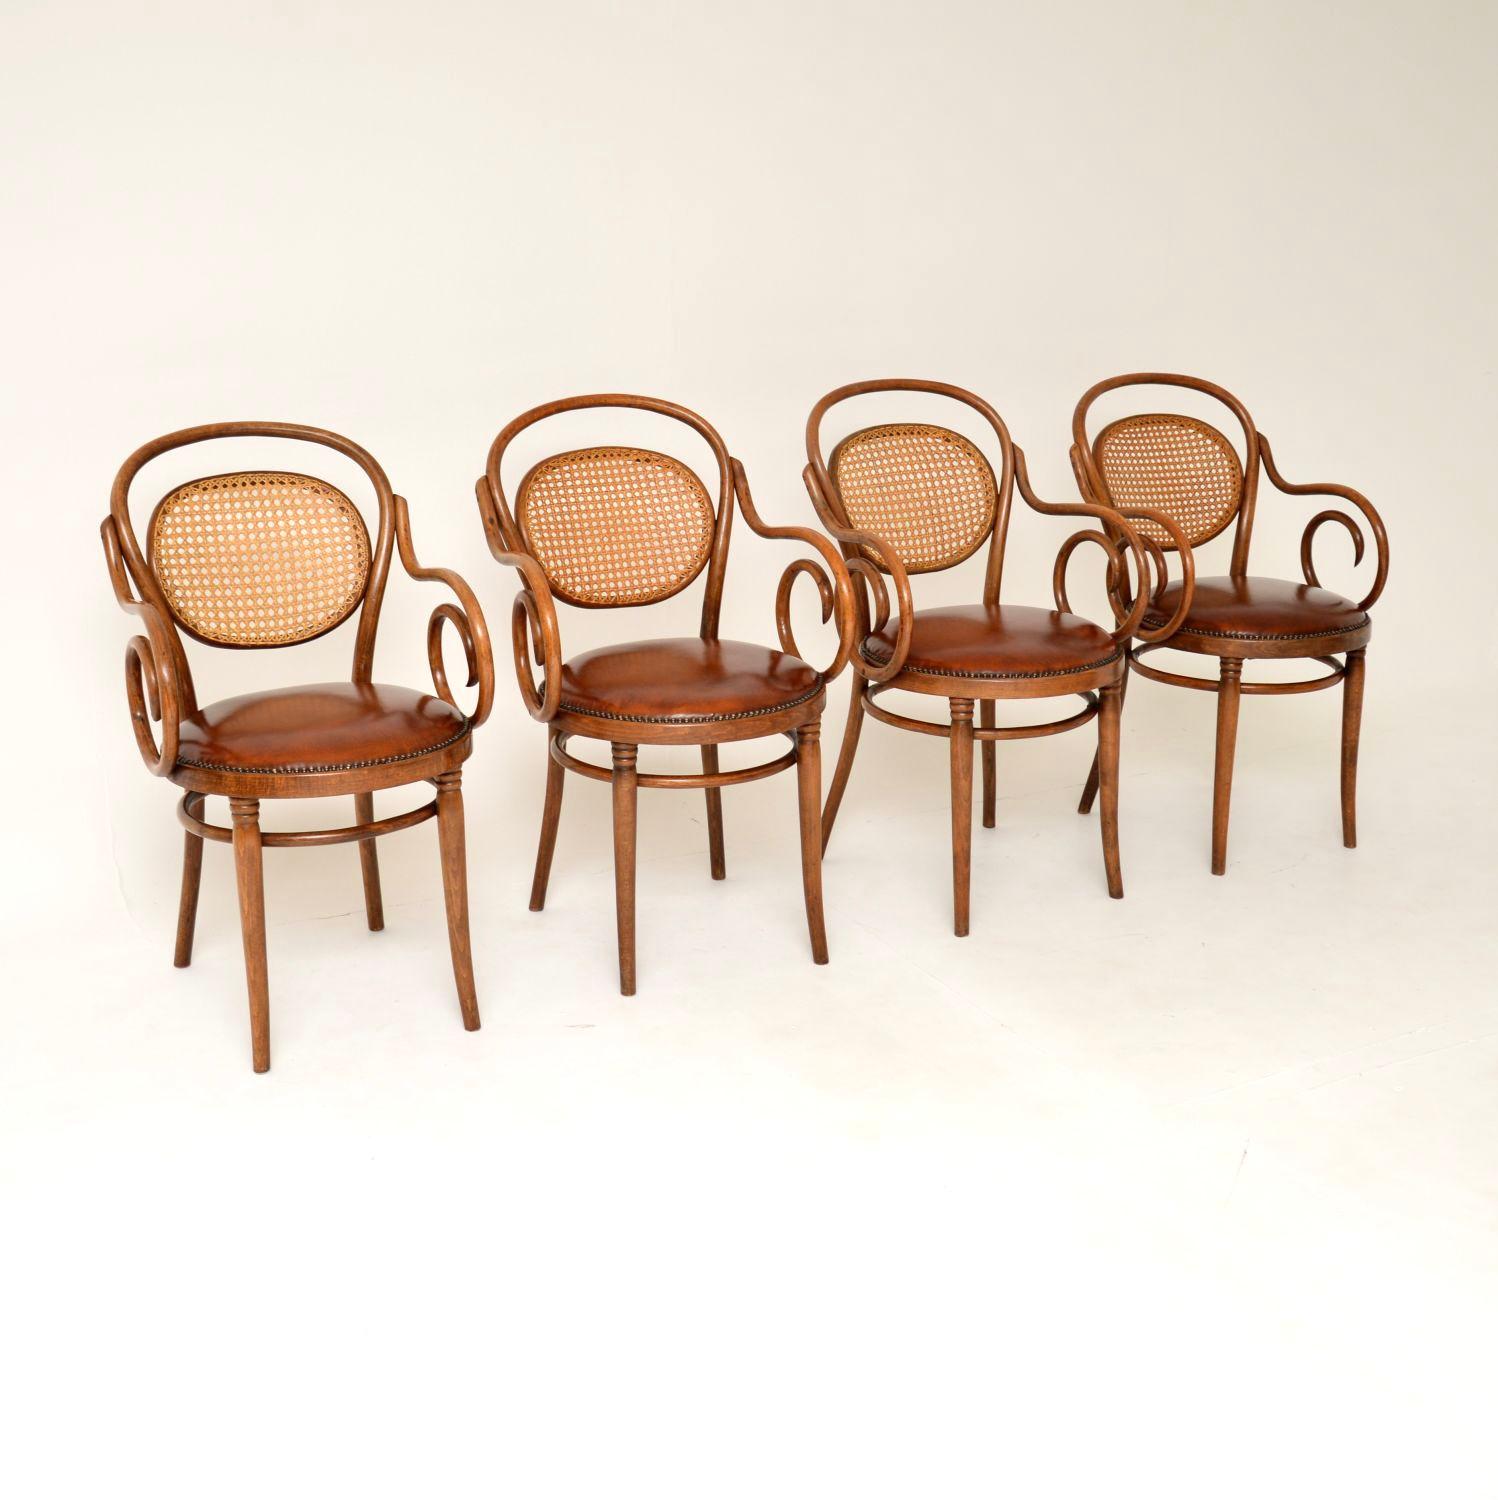 A beautiful set of four antique bentwood cafe dining chairs. These were made in Poland in the 1950-60’s, in the original Thonet factory using the original Thonet machinery.

They have a gorgeous design, with curvaceous bentwood frames, cane rattan